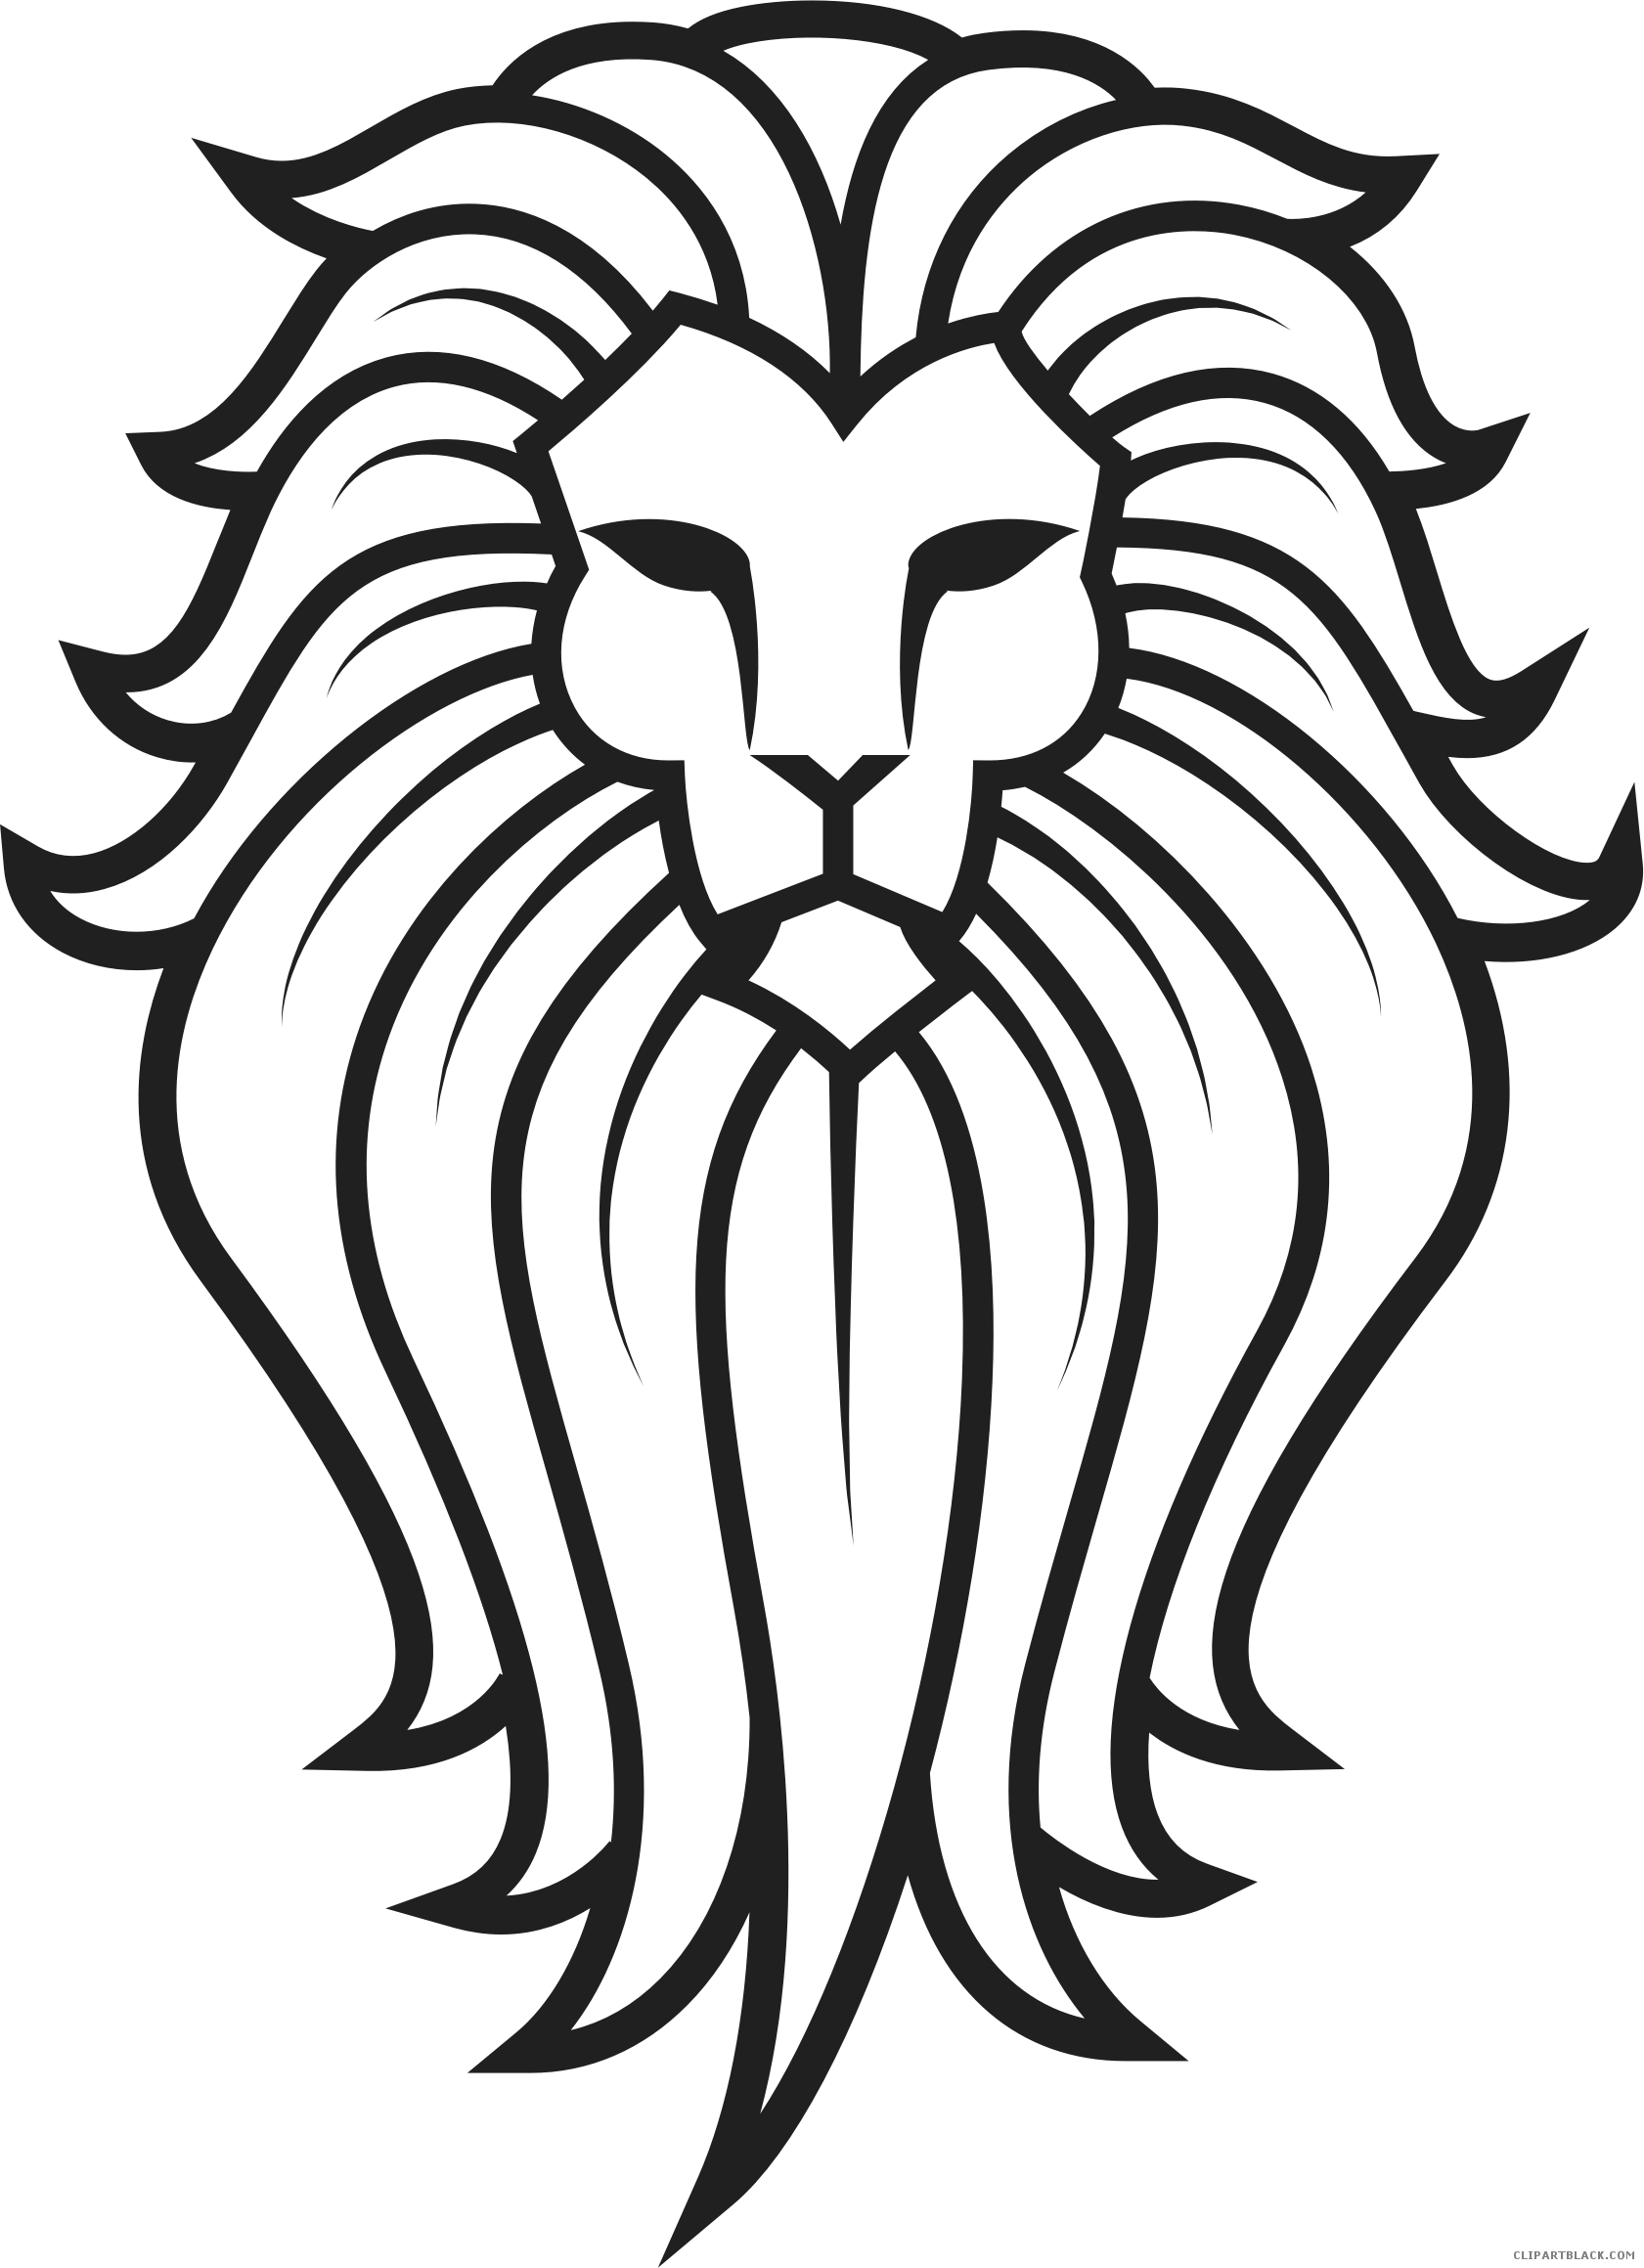 Lion Tattoo Animal Free Black White Clipart Images - Tattoo Lion Face (1681x2319)